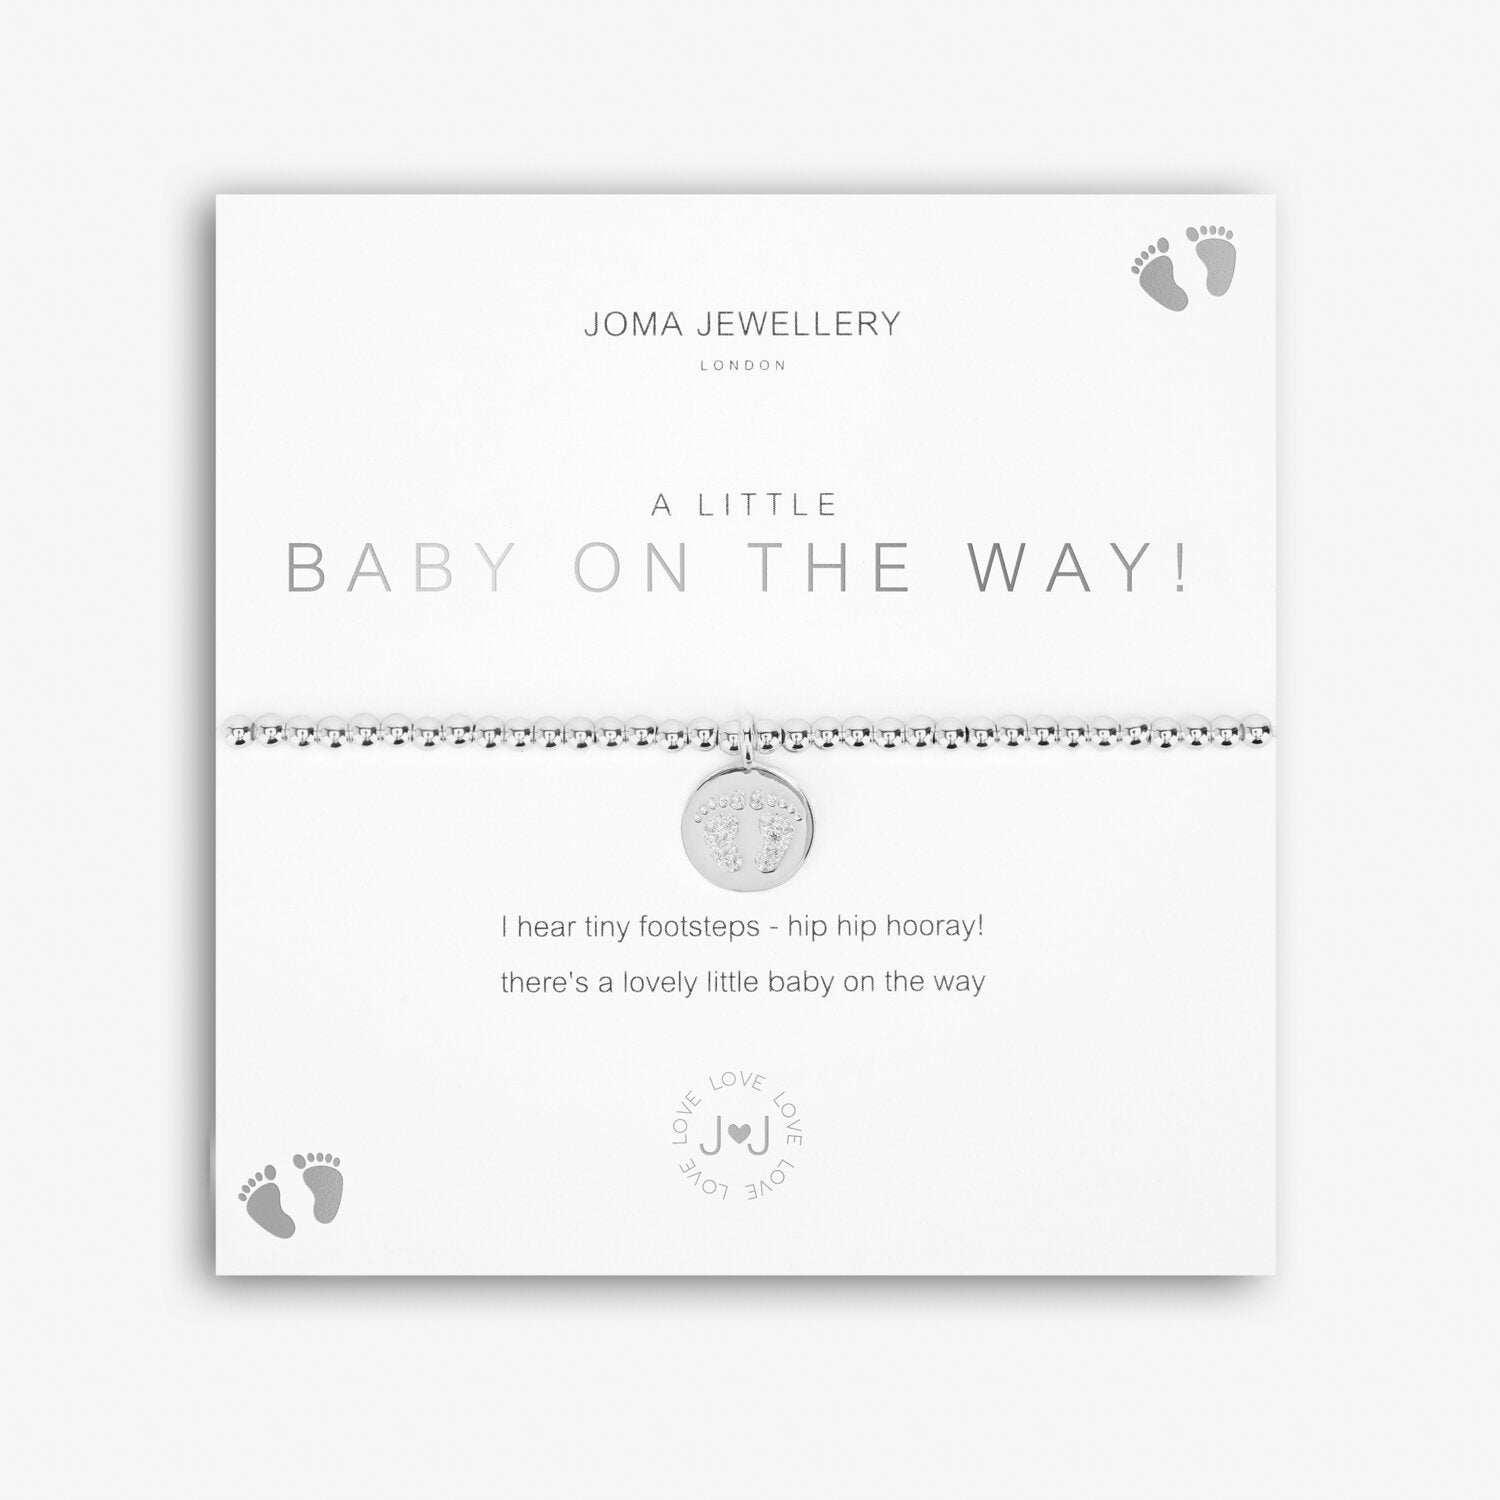 Joma Jewellery A Little 'Baby On The Way!' Bracelet | More Than Just A Gift